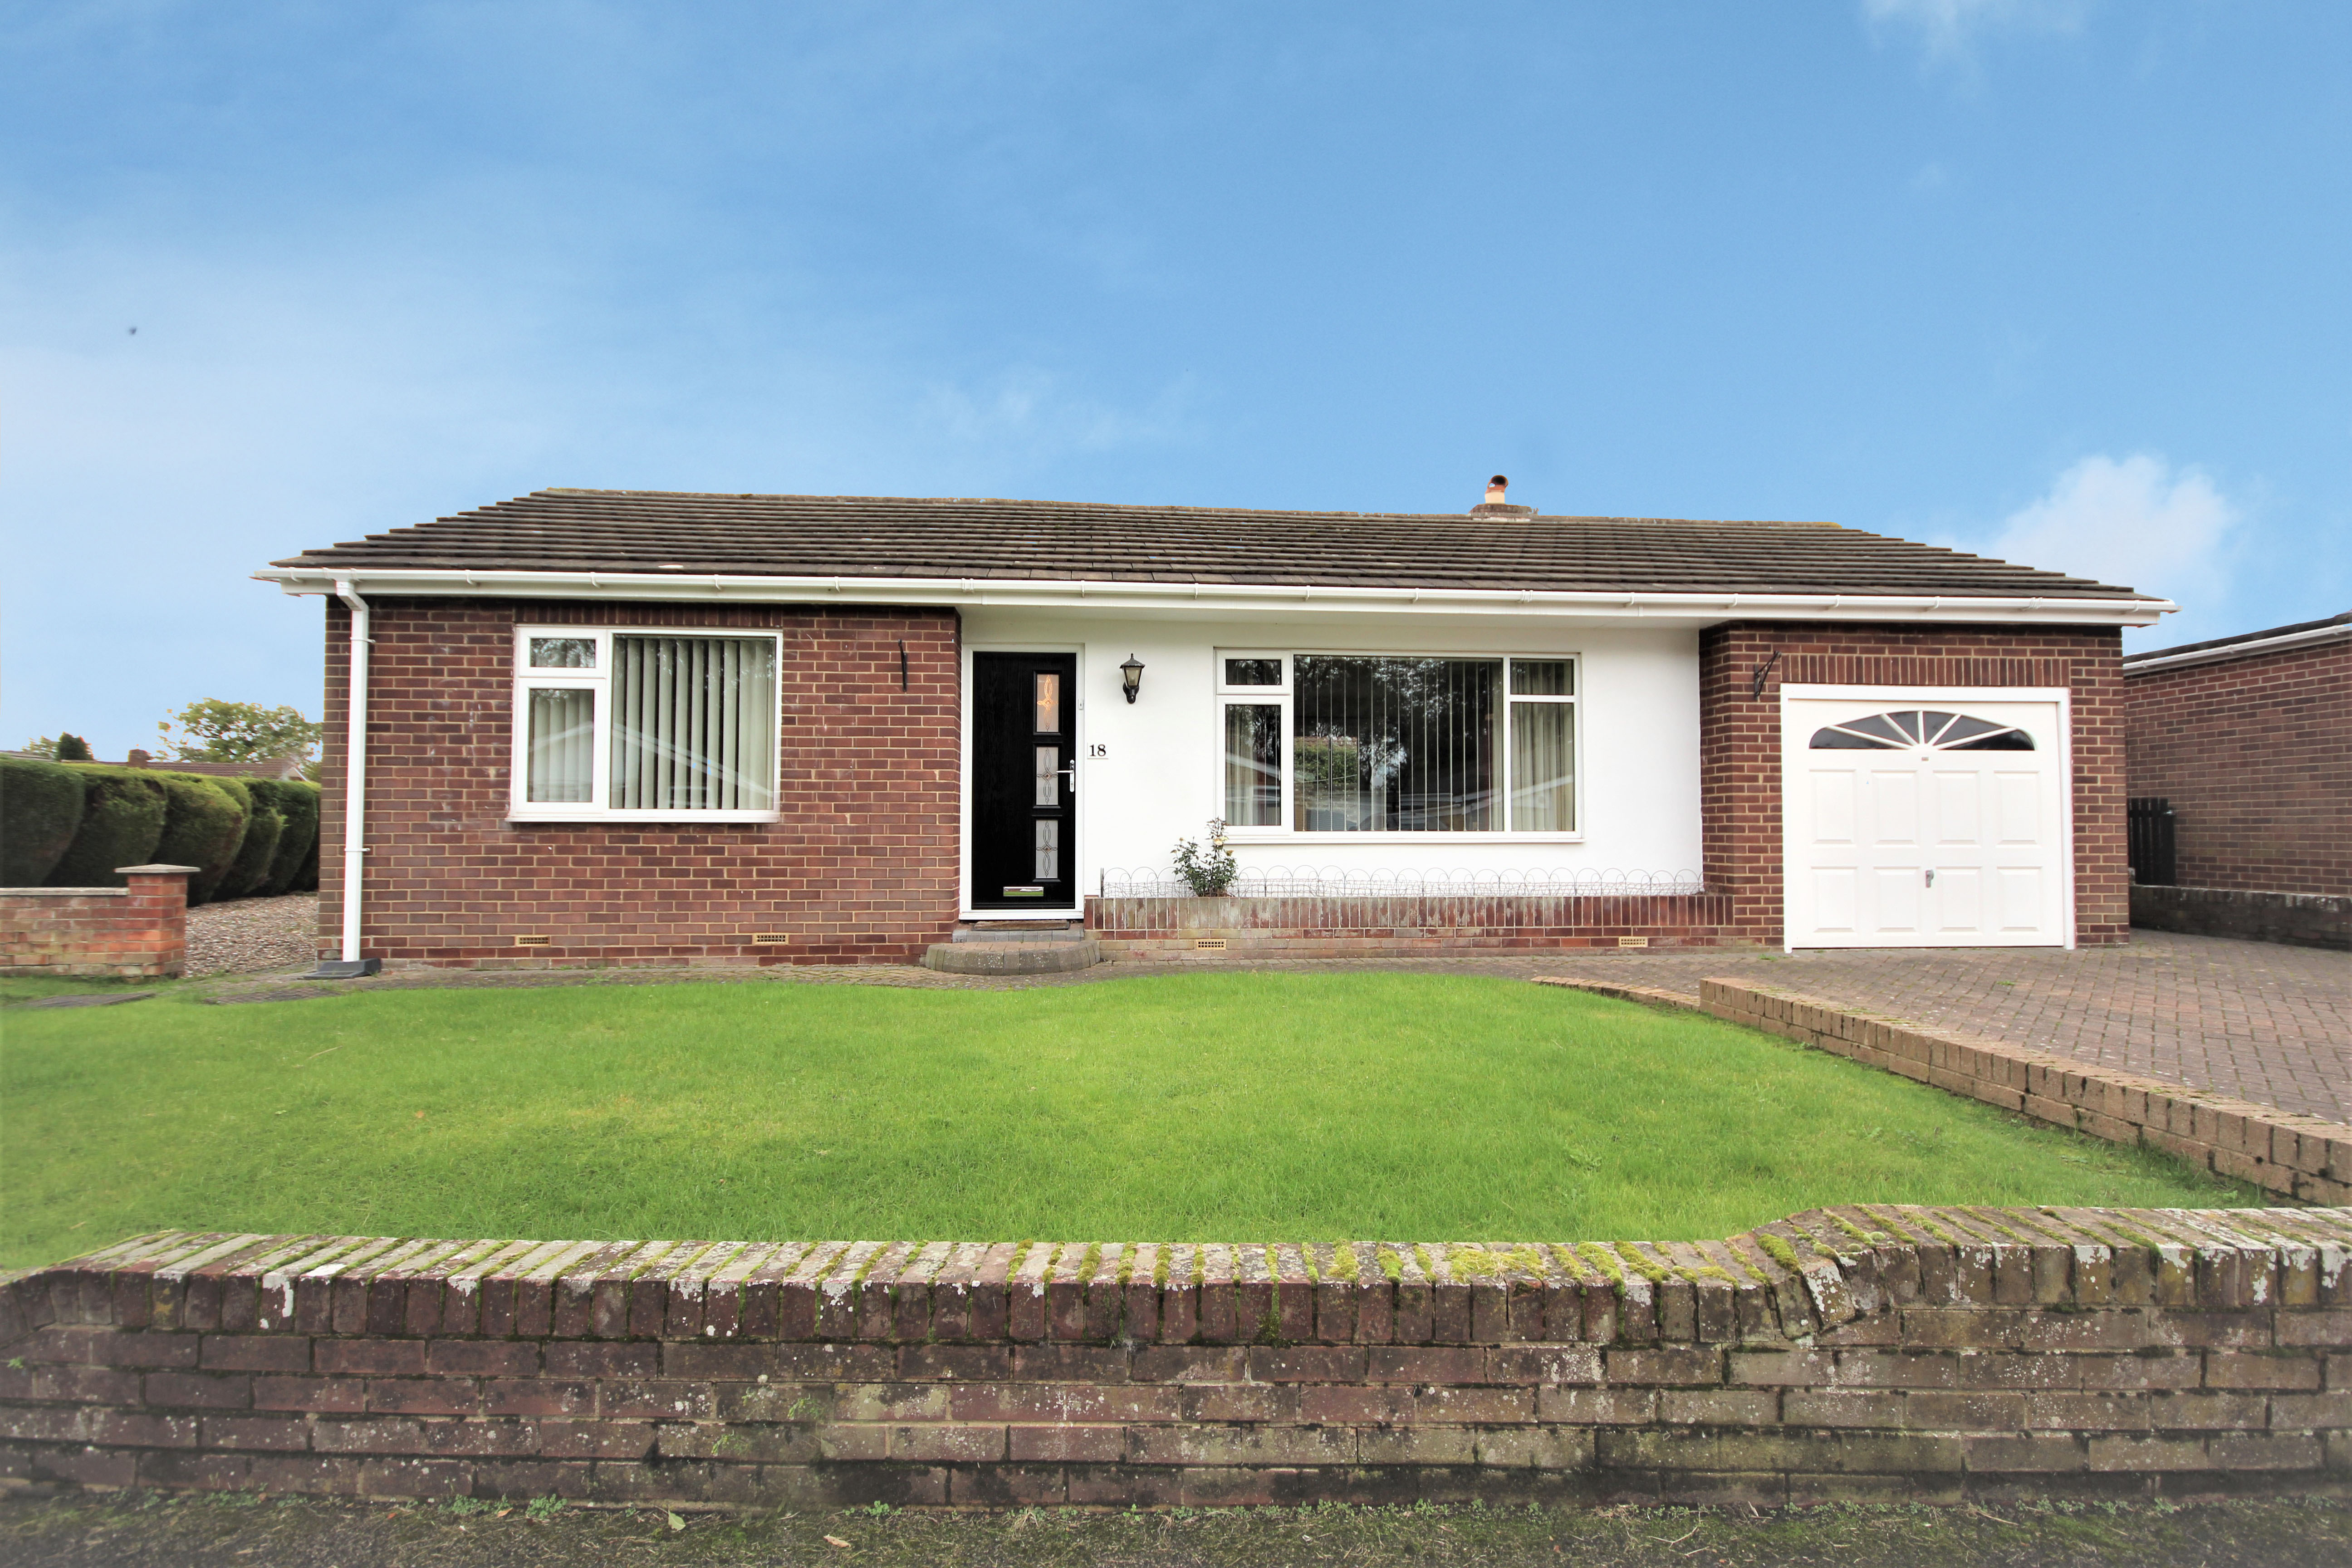 4 Bed Bungalow, Newton Aycliffe